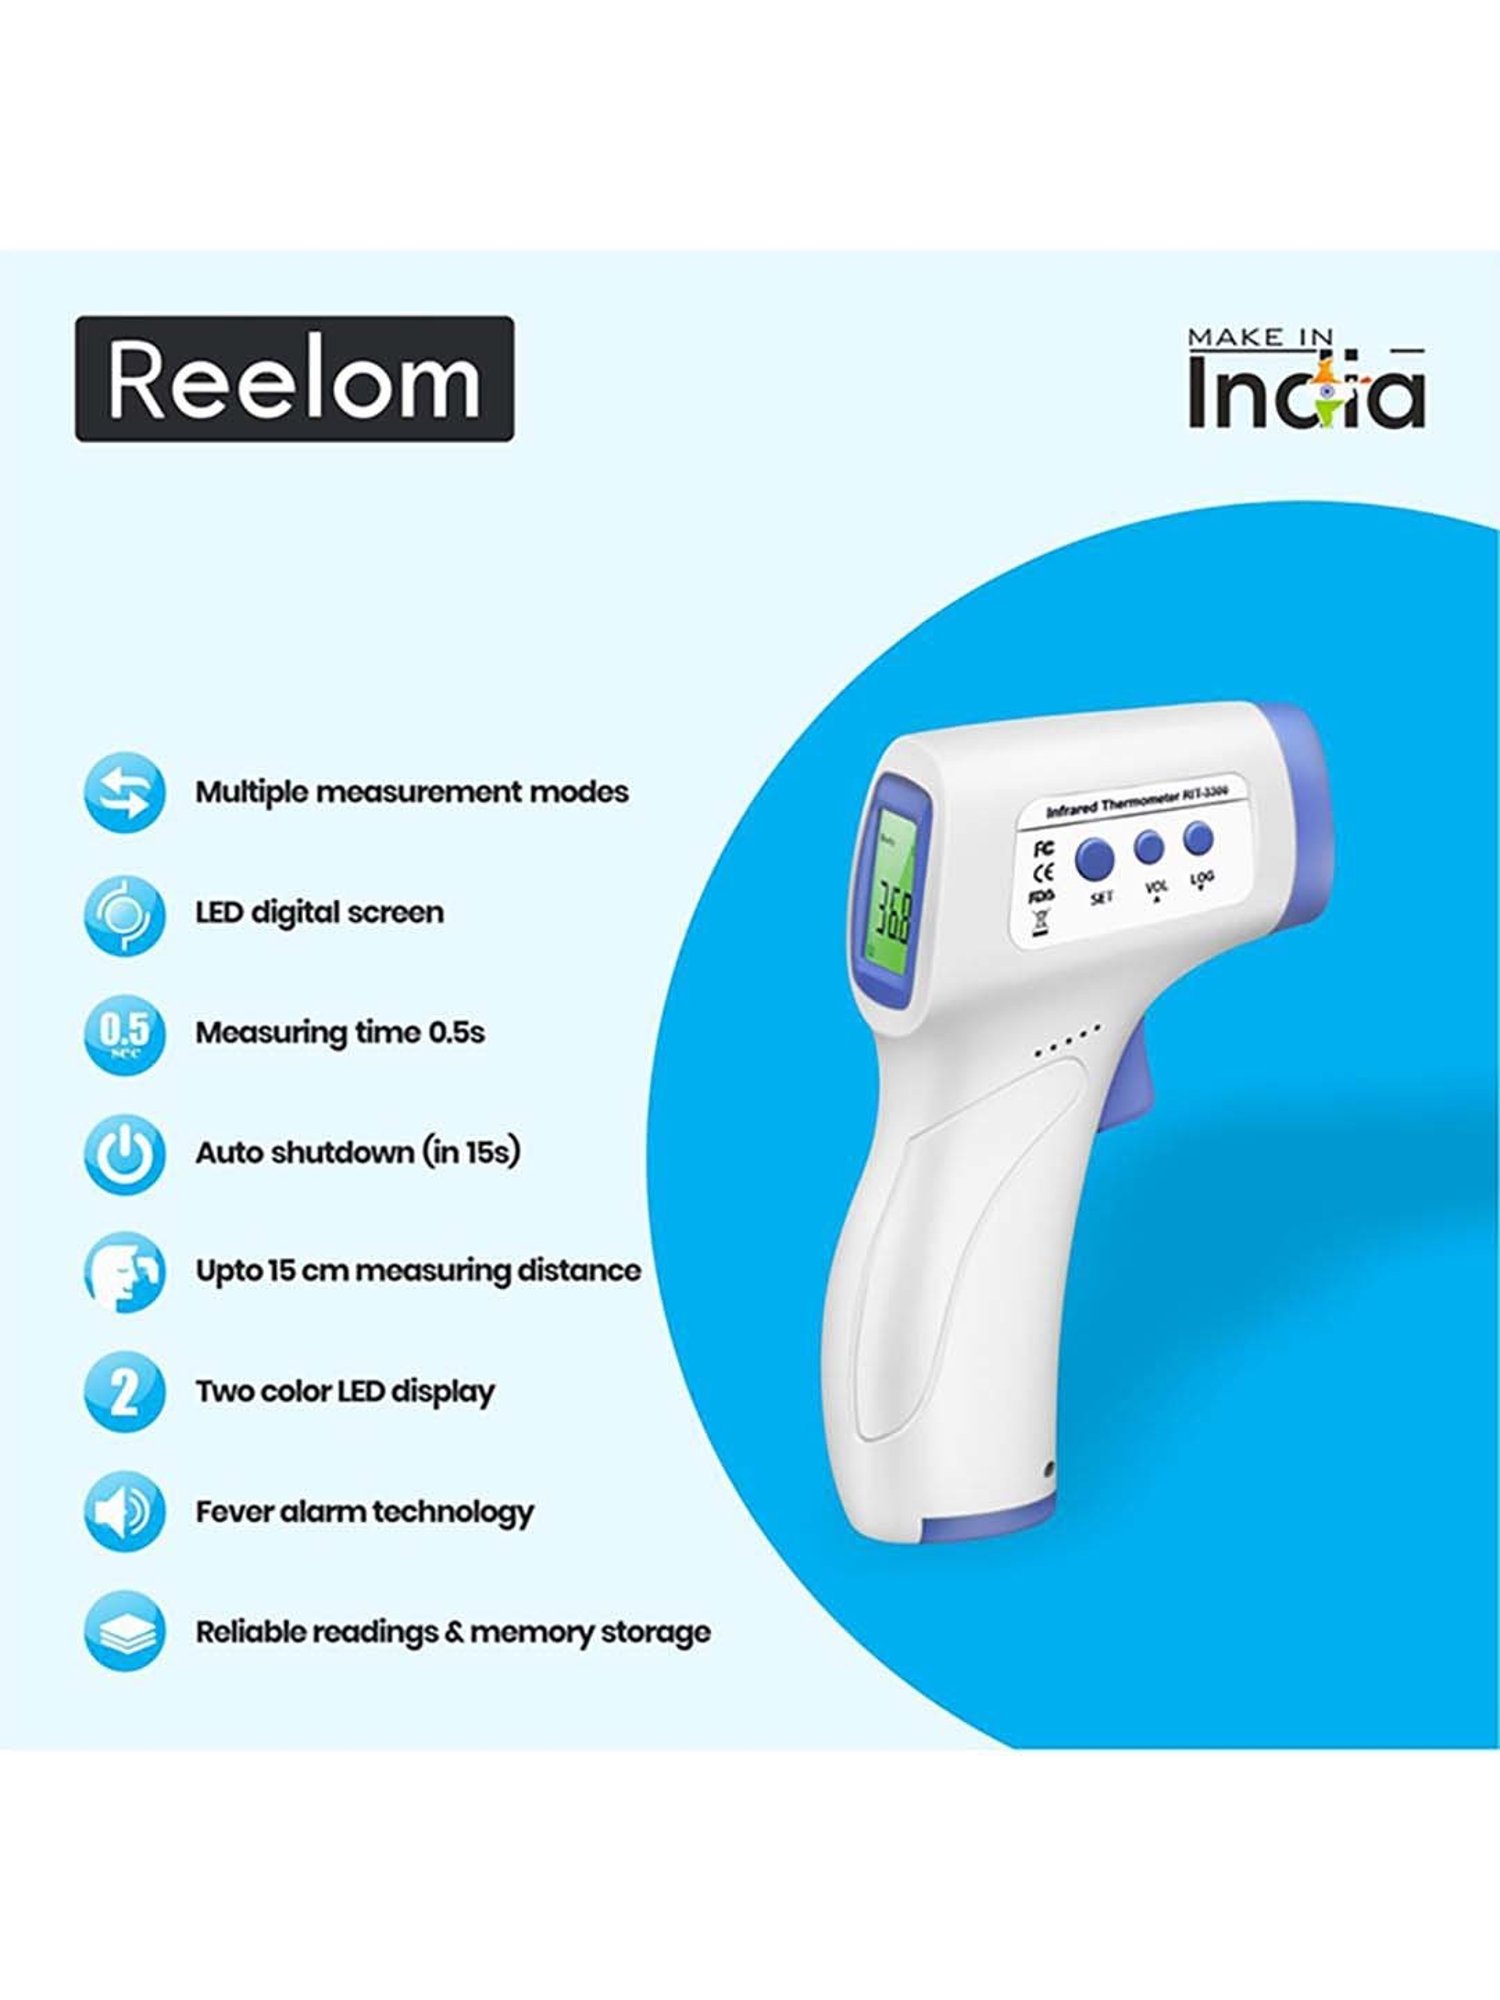 Reelom Wall Mounted Thermometer - Gloria Exports Enterprise